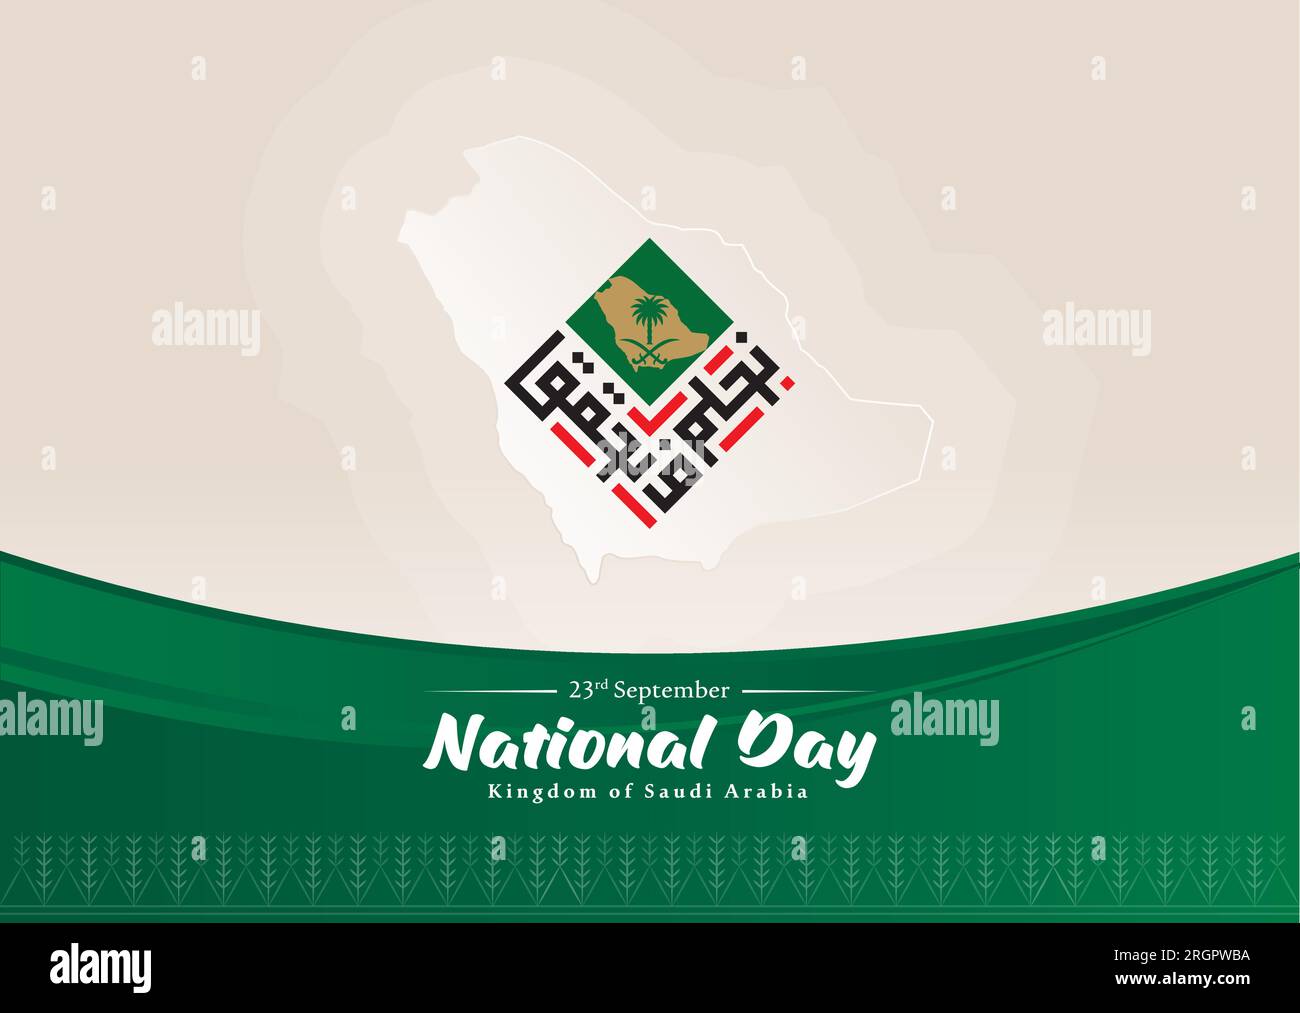 Saudi Arabia National Day Art with Arabic text saying 'We dream and achieve' Stock Vector